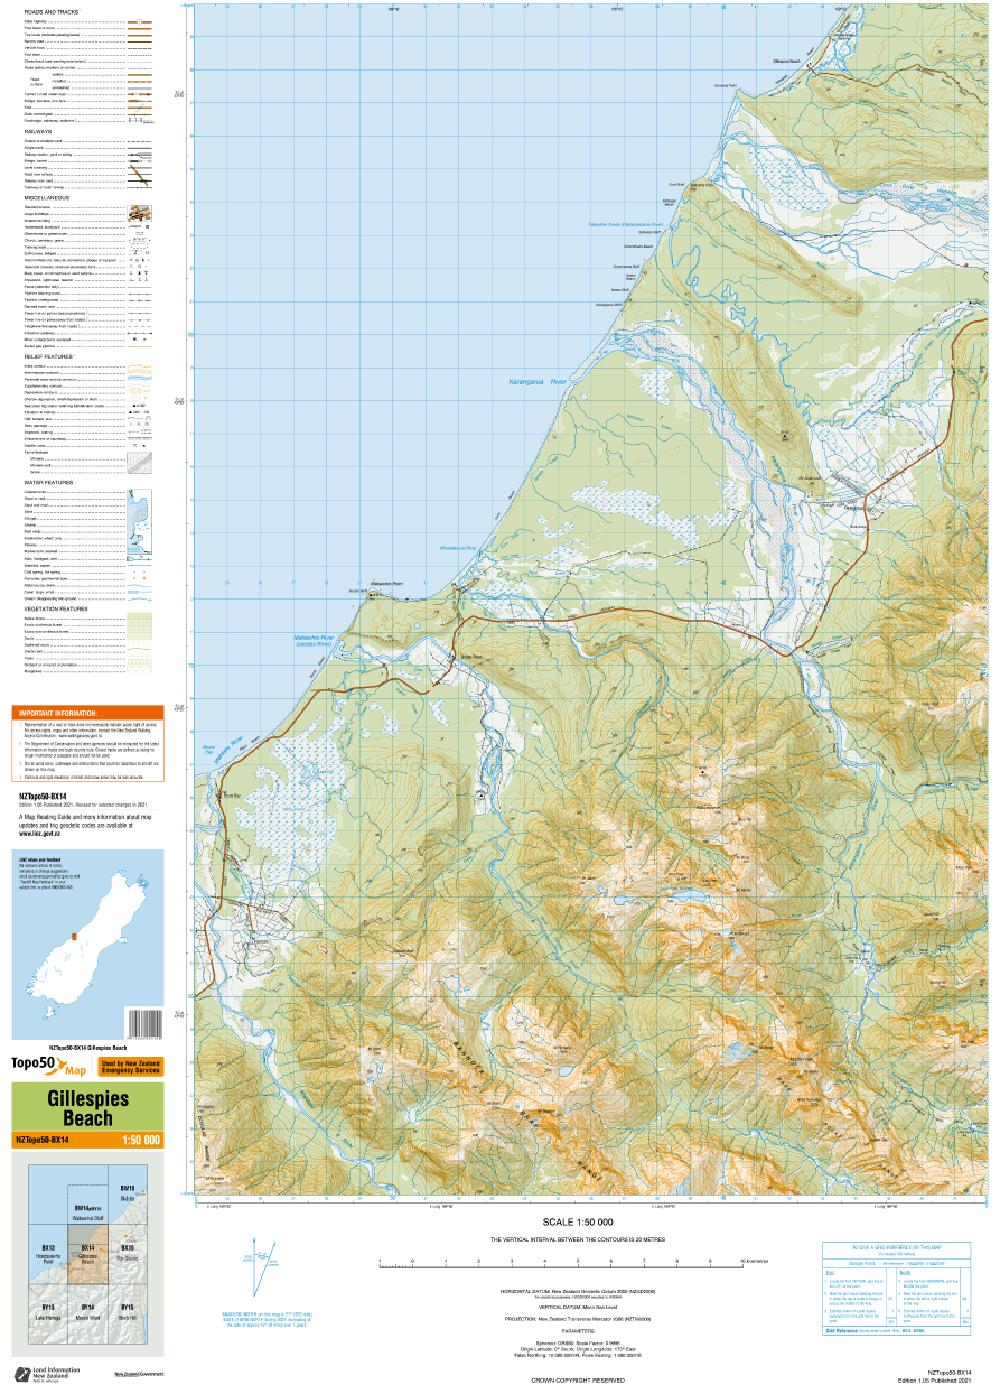 Topo map of Gillespies Beach